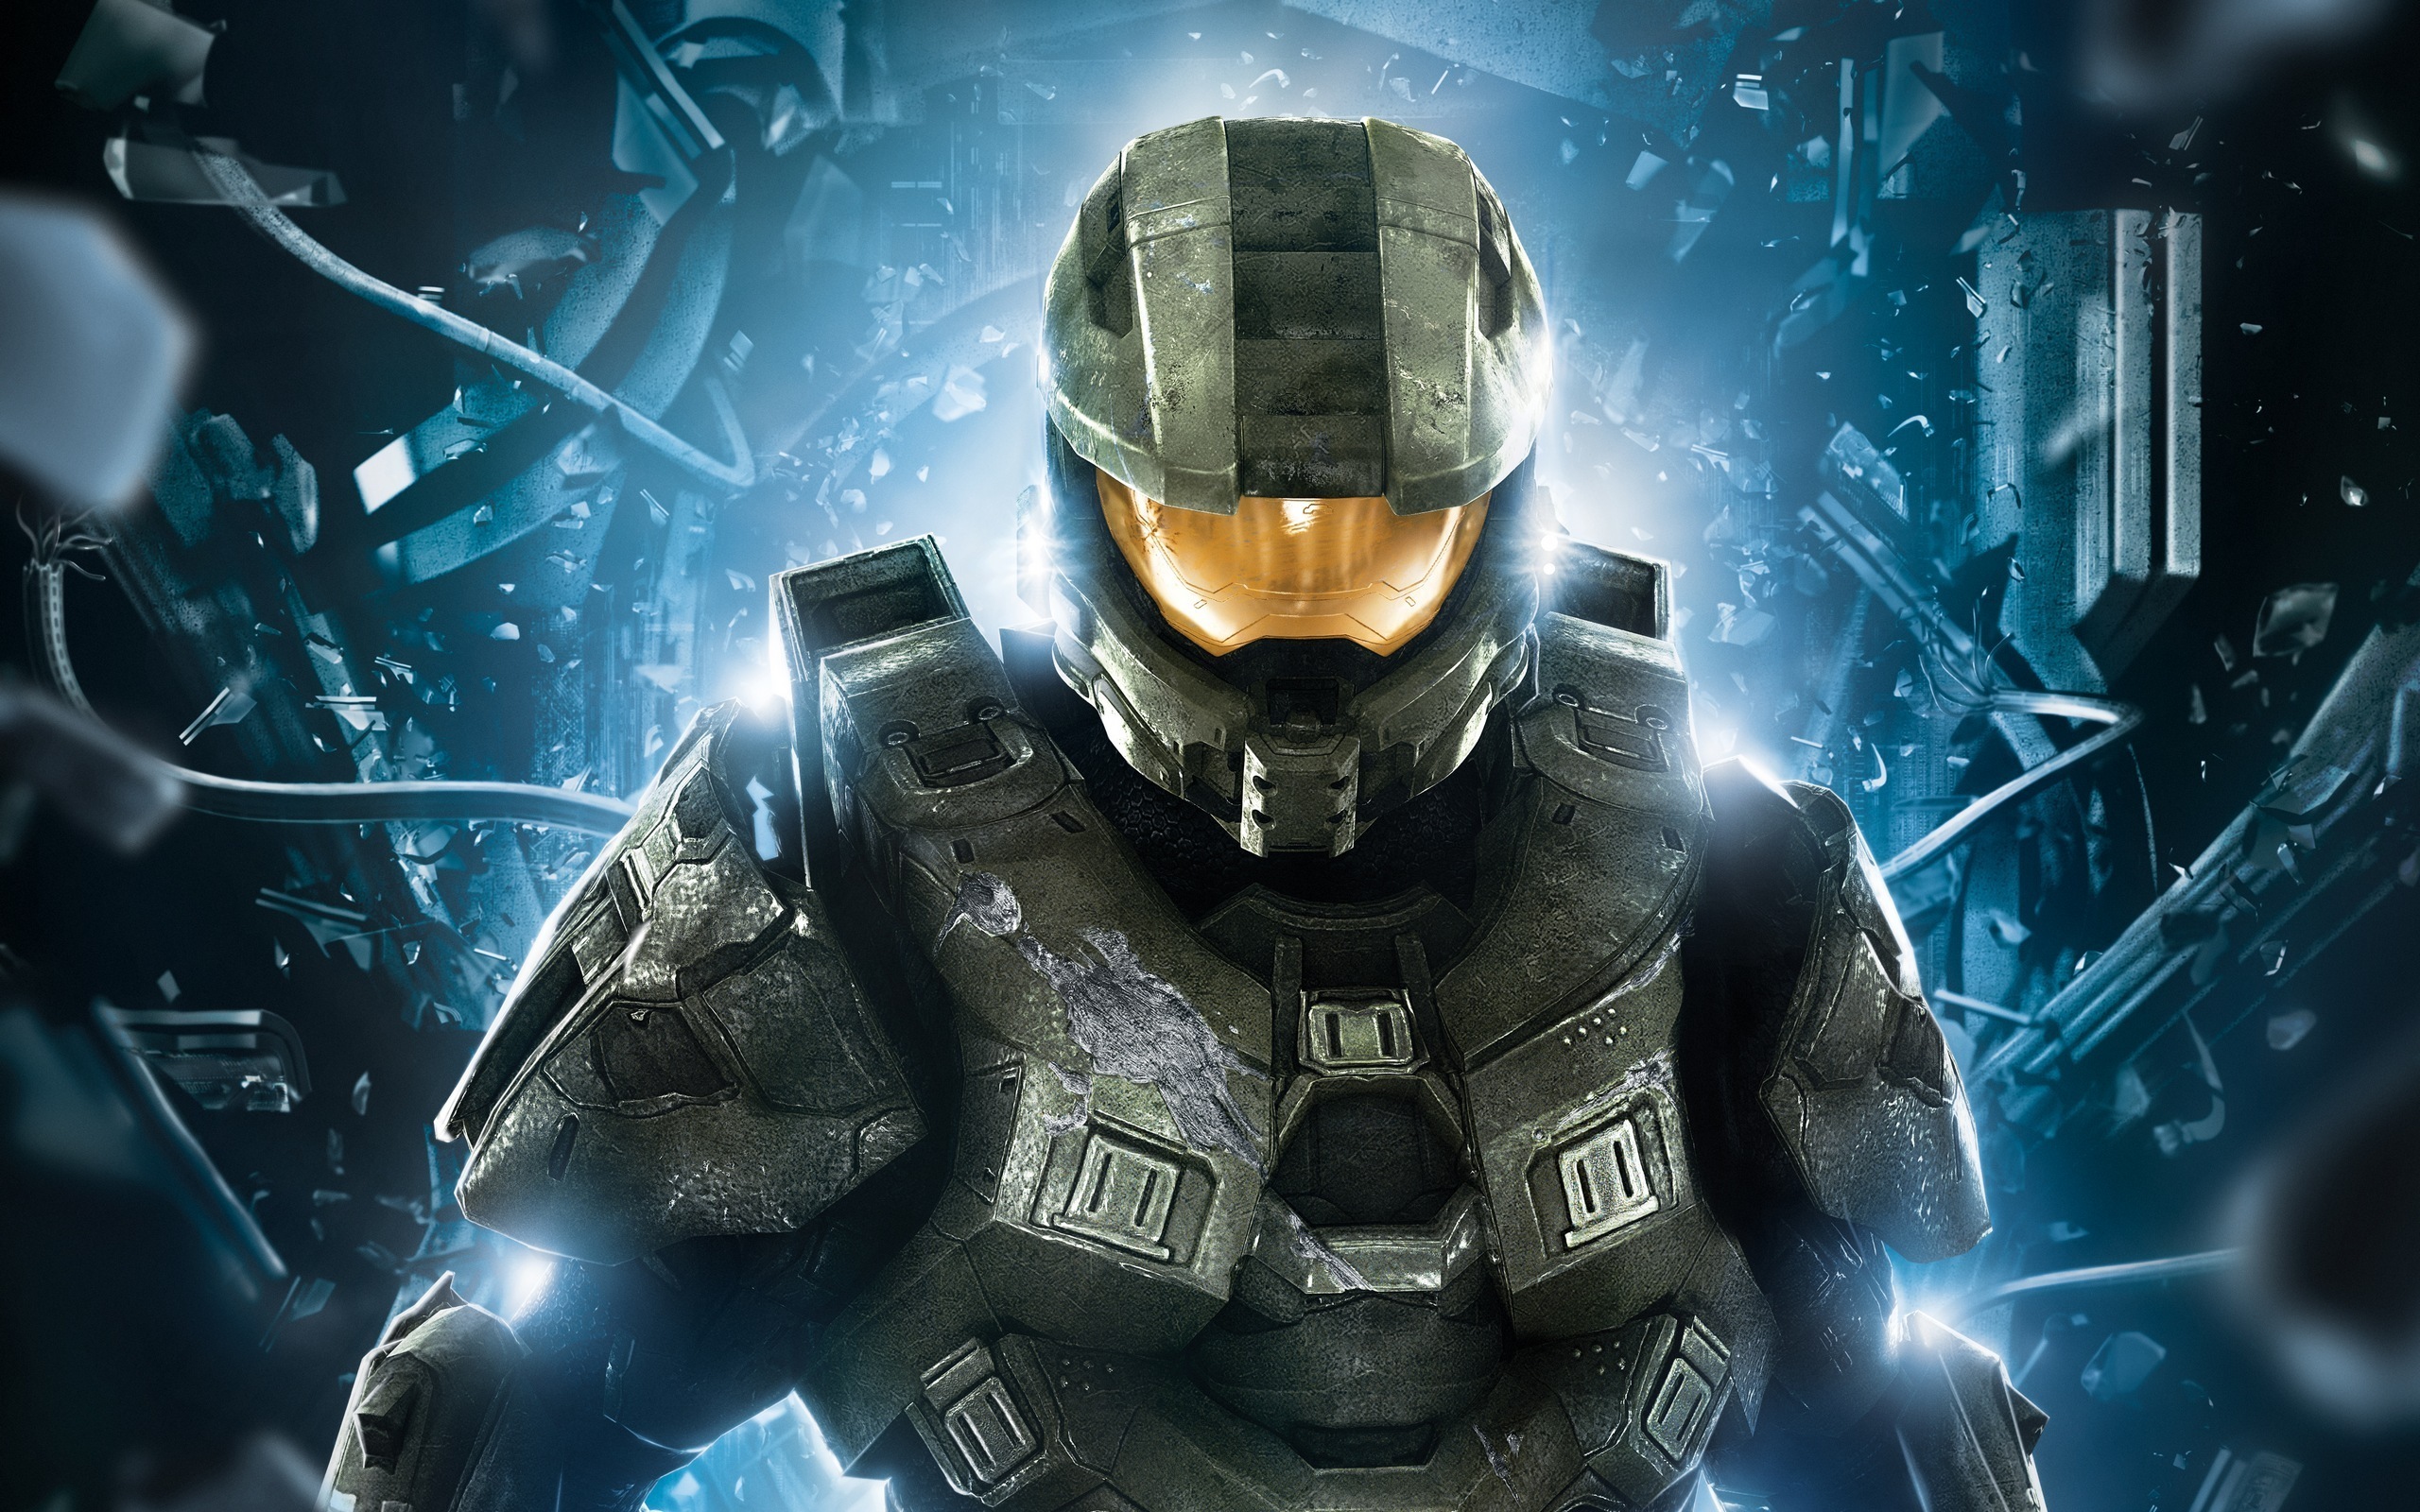 Halo 4 Xbox Game Exclusive HD Wallpapers 2982 2560x1600